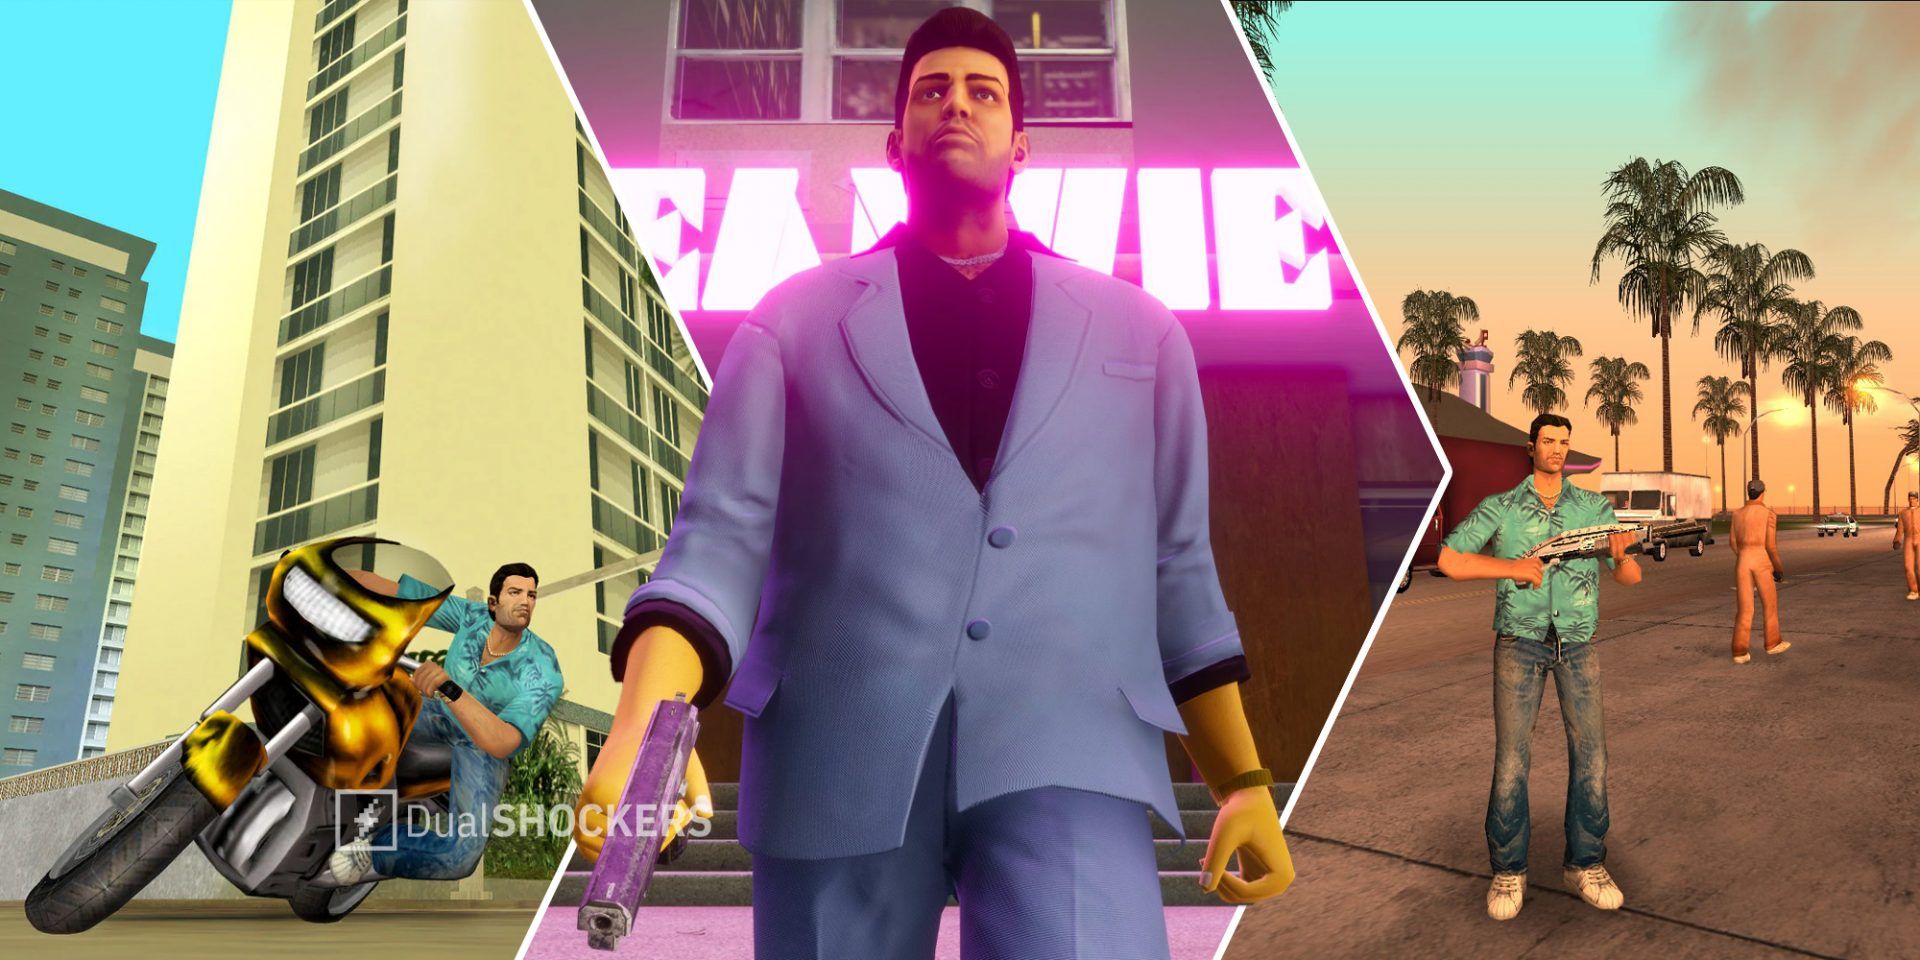 Grand Theft Auto Vice City Tommy Vercetti on a motorcycle on left, Tommy Vercetti with gun in middle, Tommy Vercetti with gun on a street lined with palm trees on right